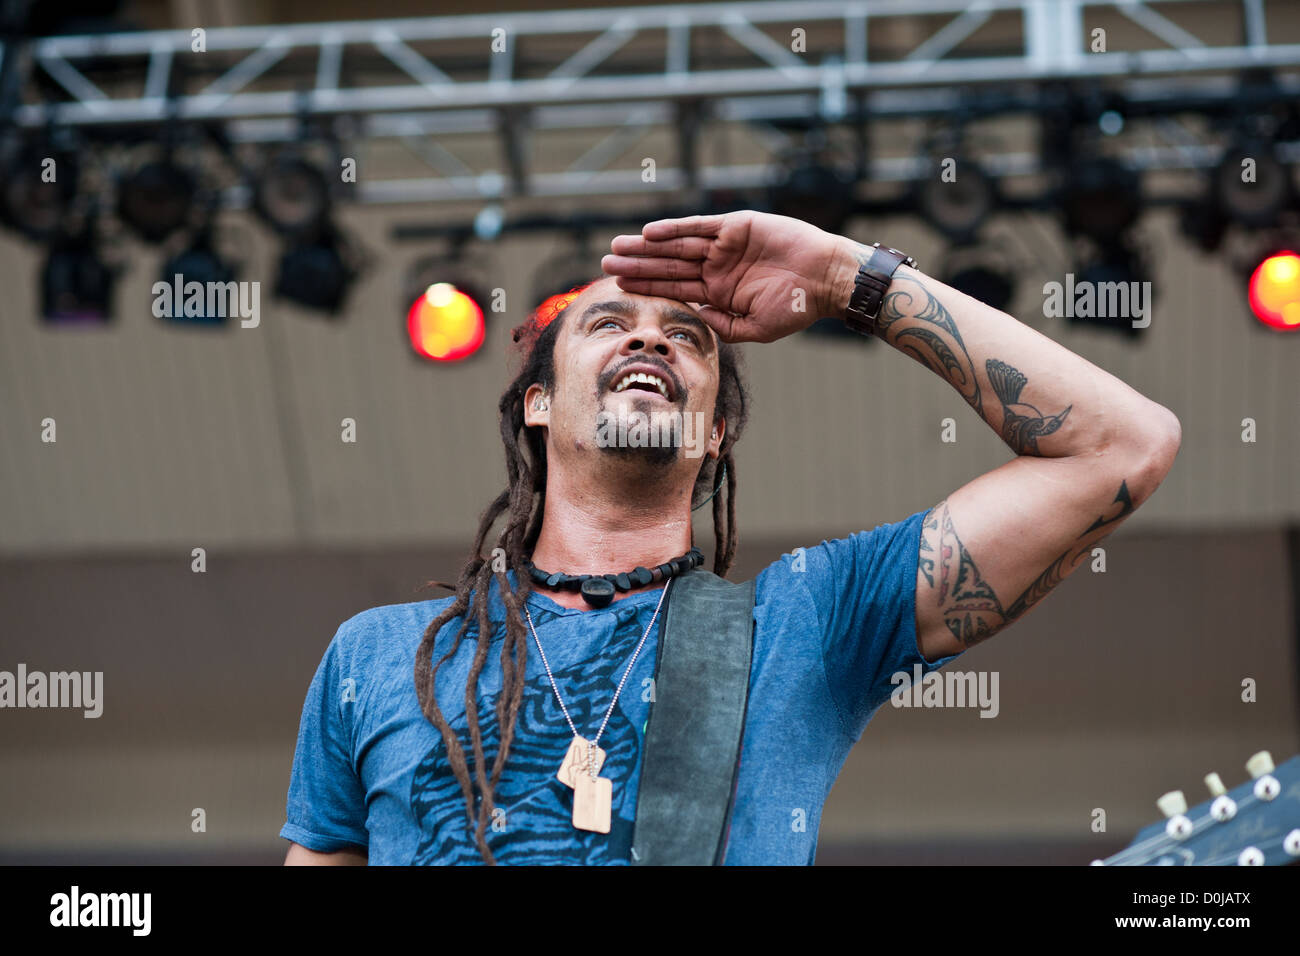 Michael Franti & Spearhead performing at the Taste of Chicago, July 13, 2012. MAX HERMAN/ALAMY Stock Photo